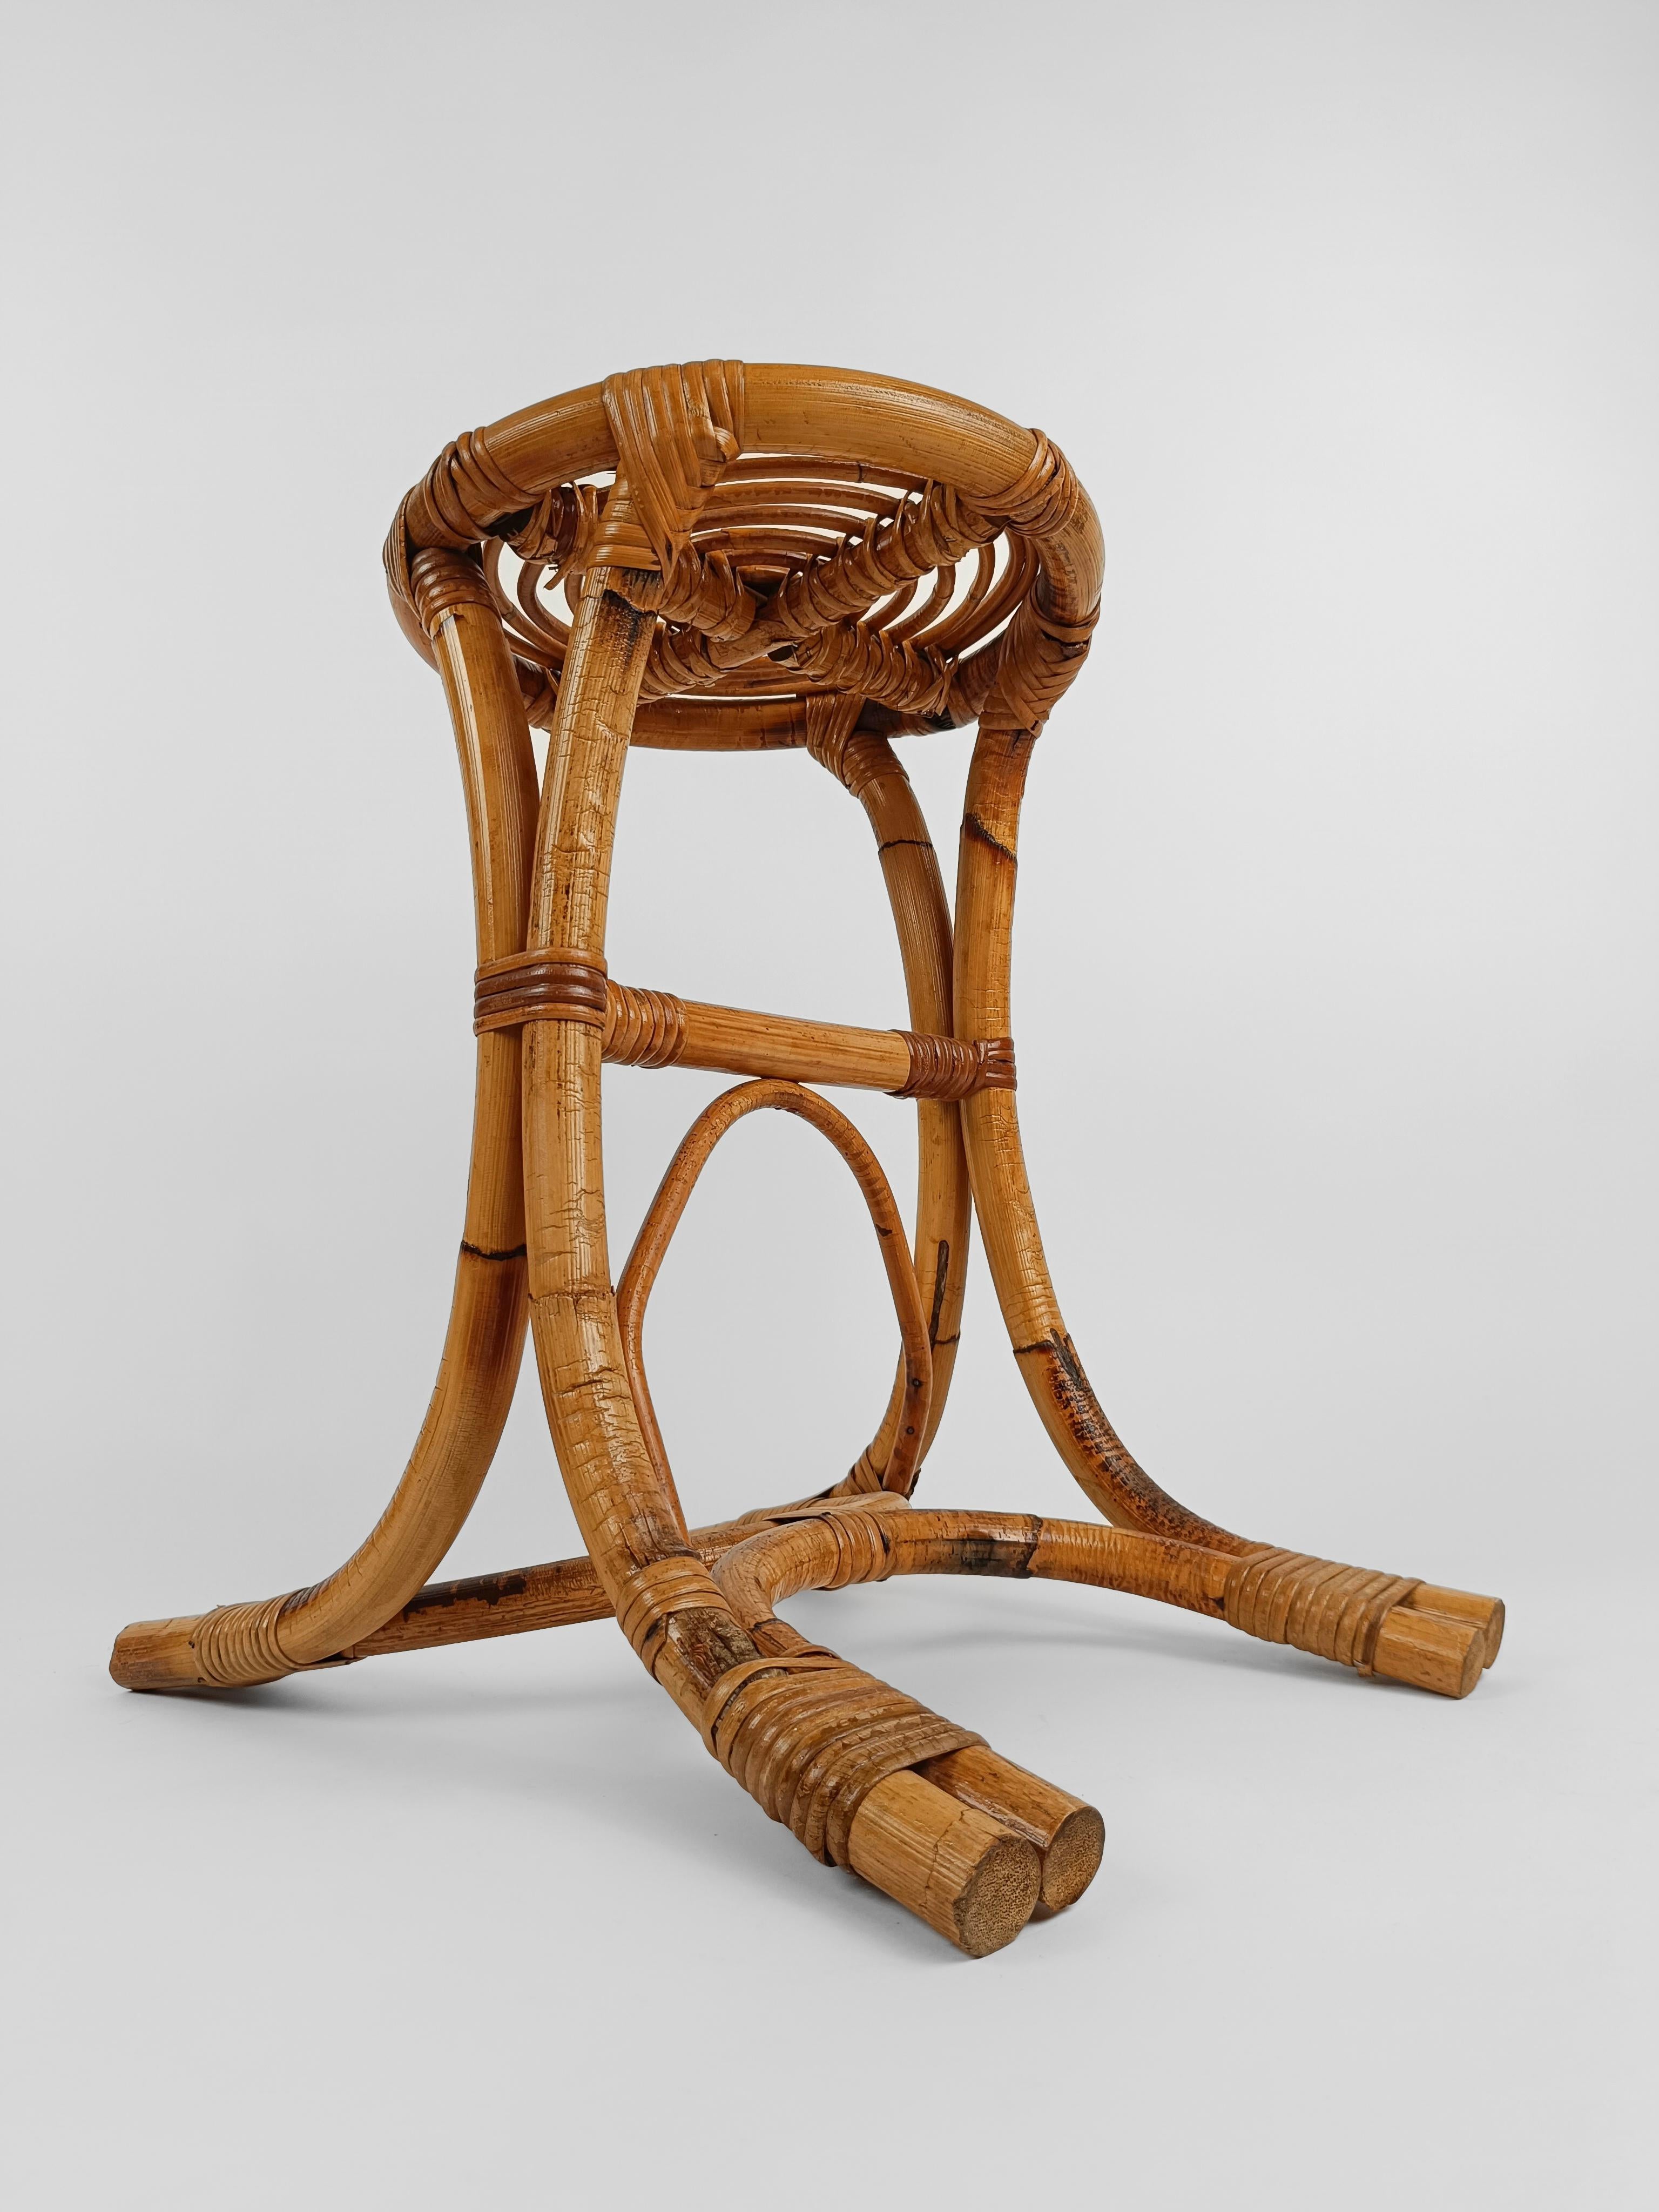 20th Century Italian Mid-Century Modern Bamboo Rattan and Cane Stool, 1960s  For Sale